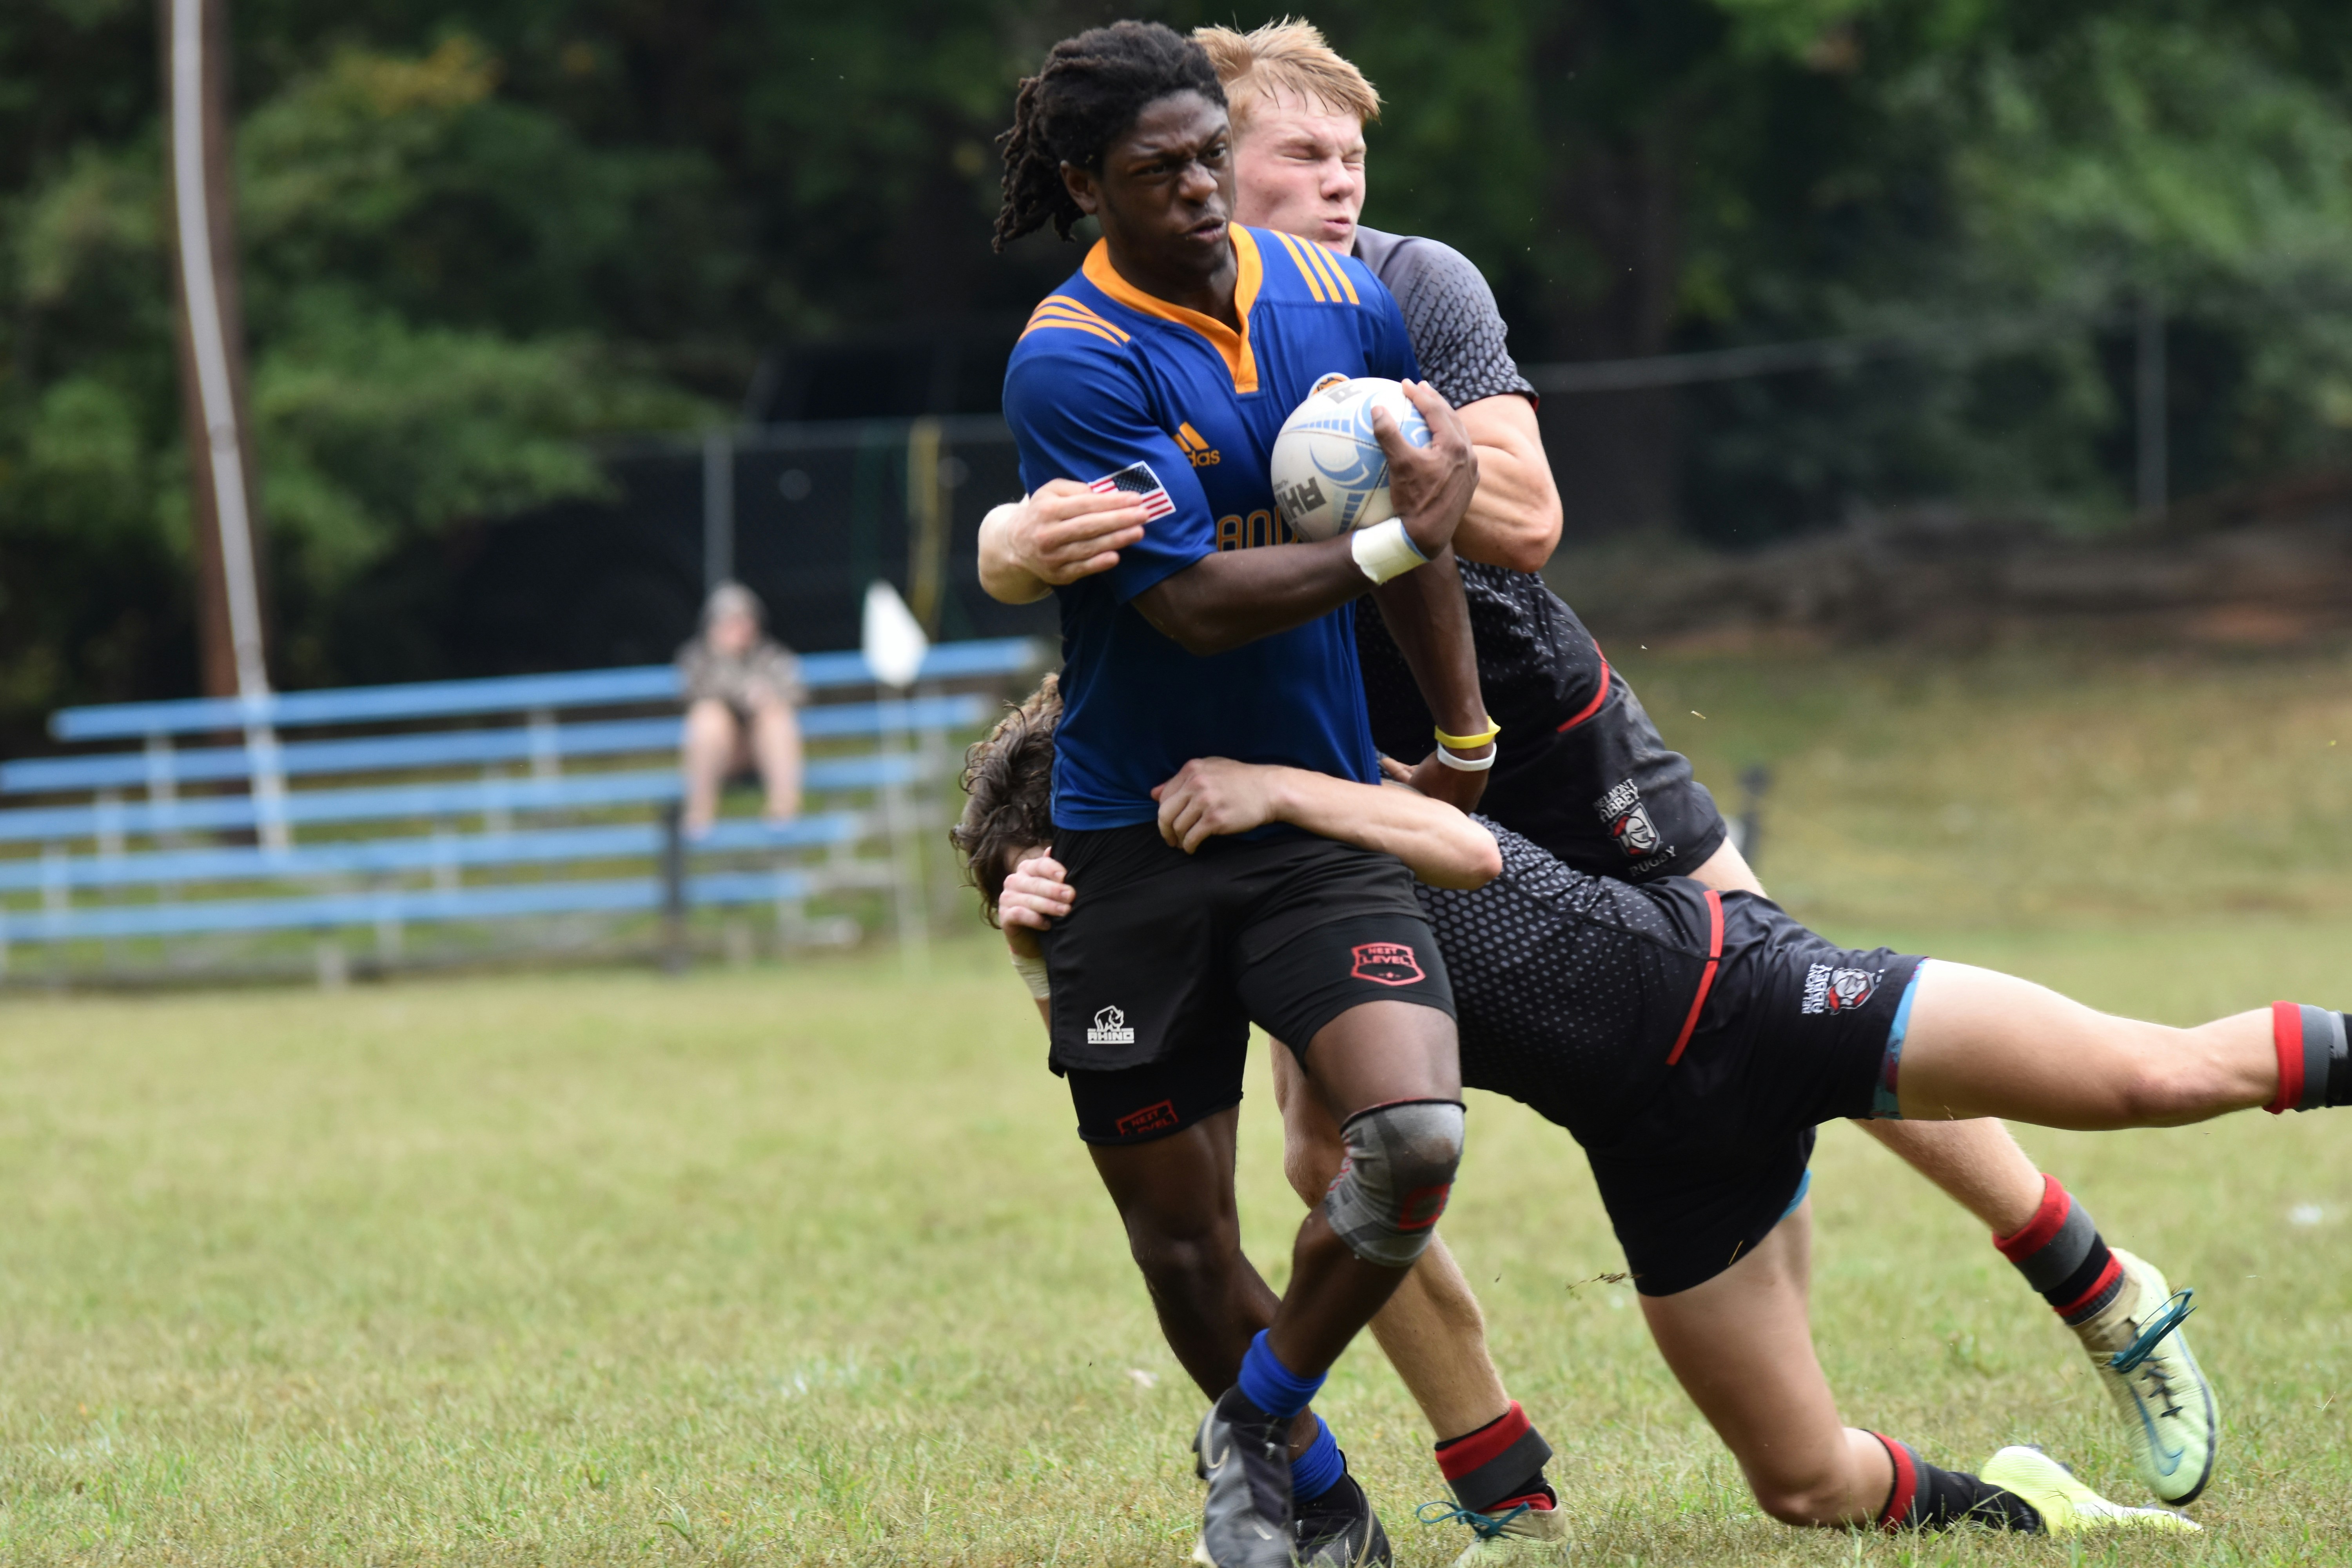 Multiple Belmont Abbey College Players tackle a Lander University player during an Autumn rugby game in Charlotte North Carolina.